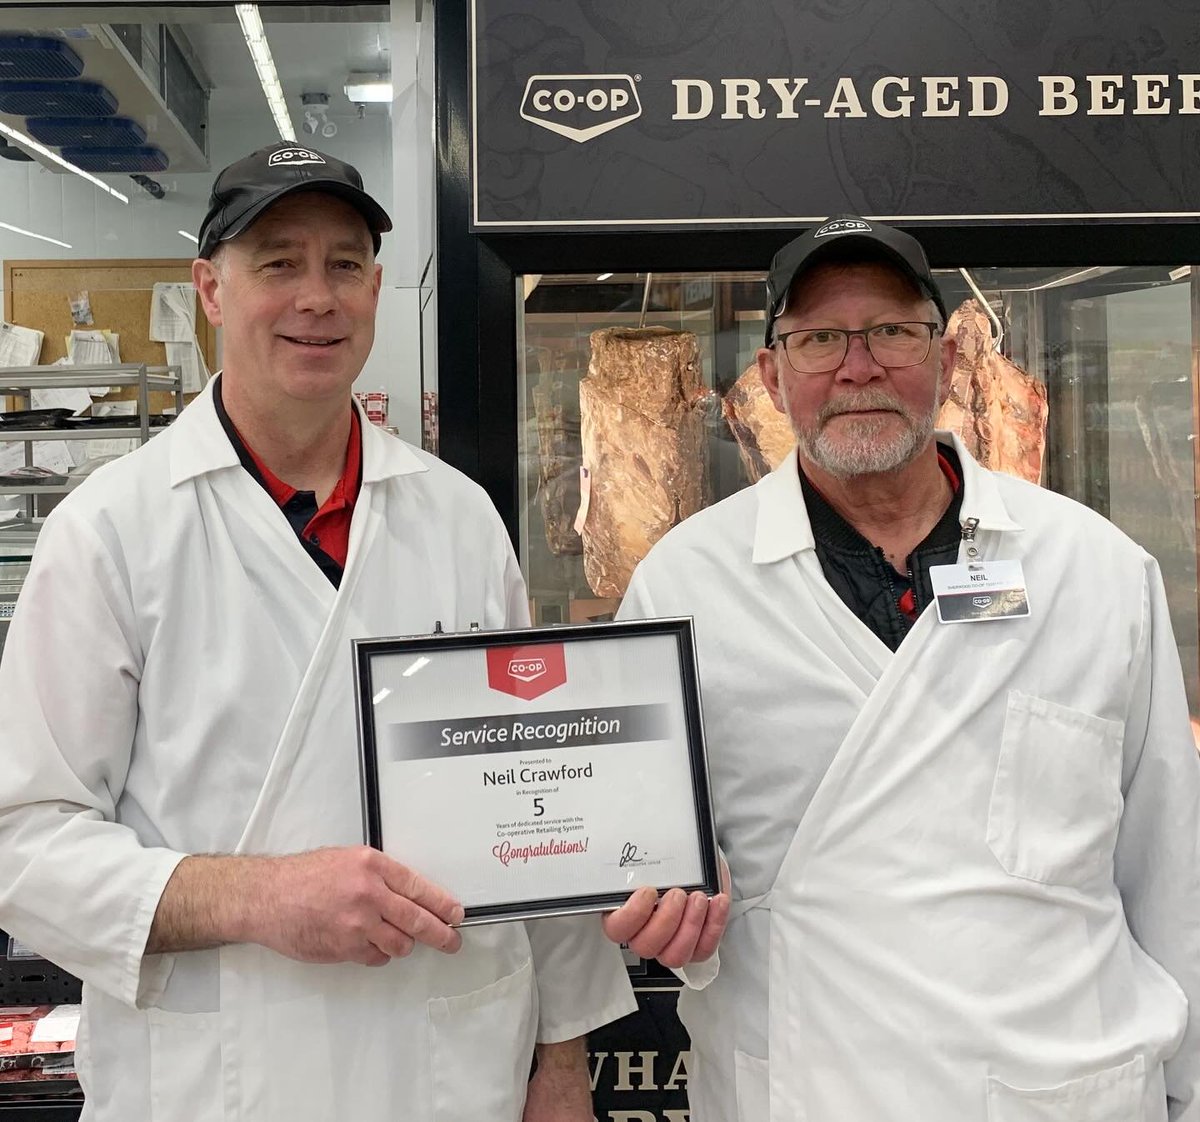 Congratulations Neil Crawford on 5 years of service with Sherwood Co-op! Neil is one of our fabulous meat cutters at the Quance Food Store. For all your summer grilling recommendations, stop by the meat departments for everything you need, including the expertise to guide you!